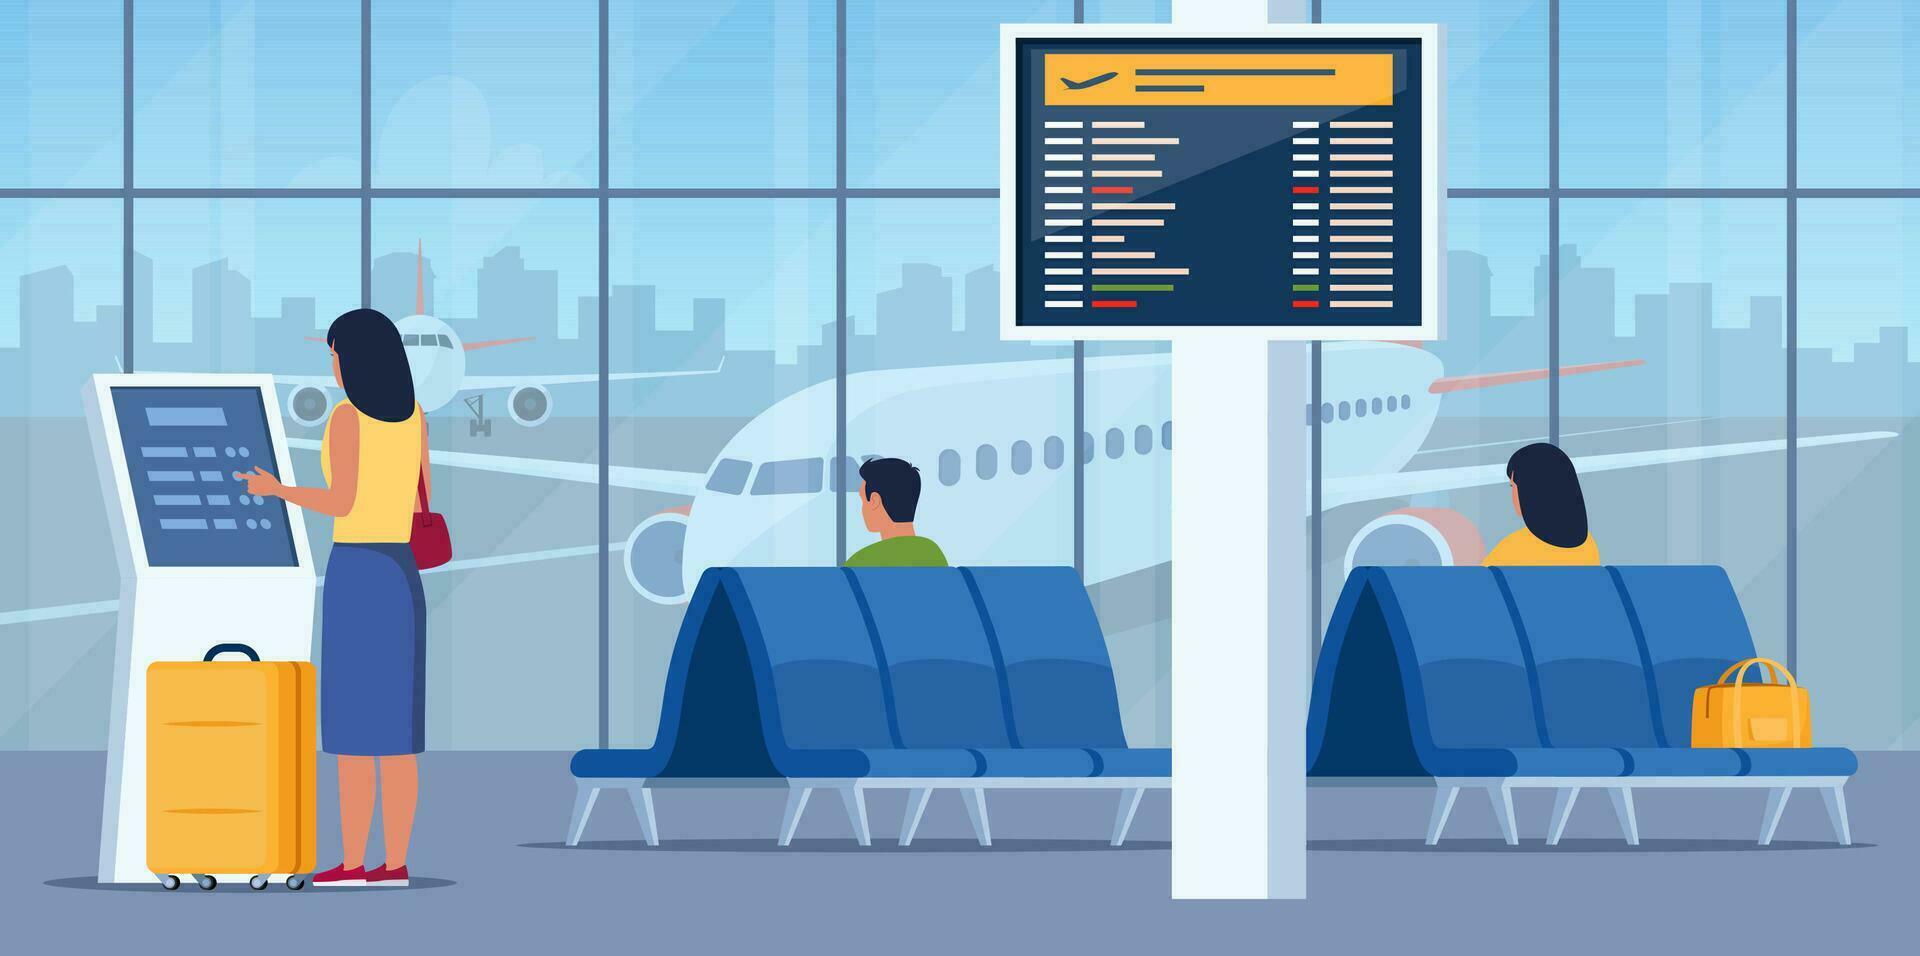 People in airport arrival waiting room or departure lounge with chairs and information panel. Woman self check in at automatic machine or buying ticket using interactive terminal. Vector illustration.